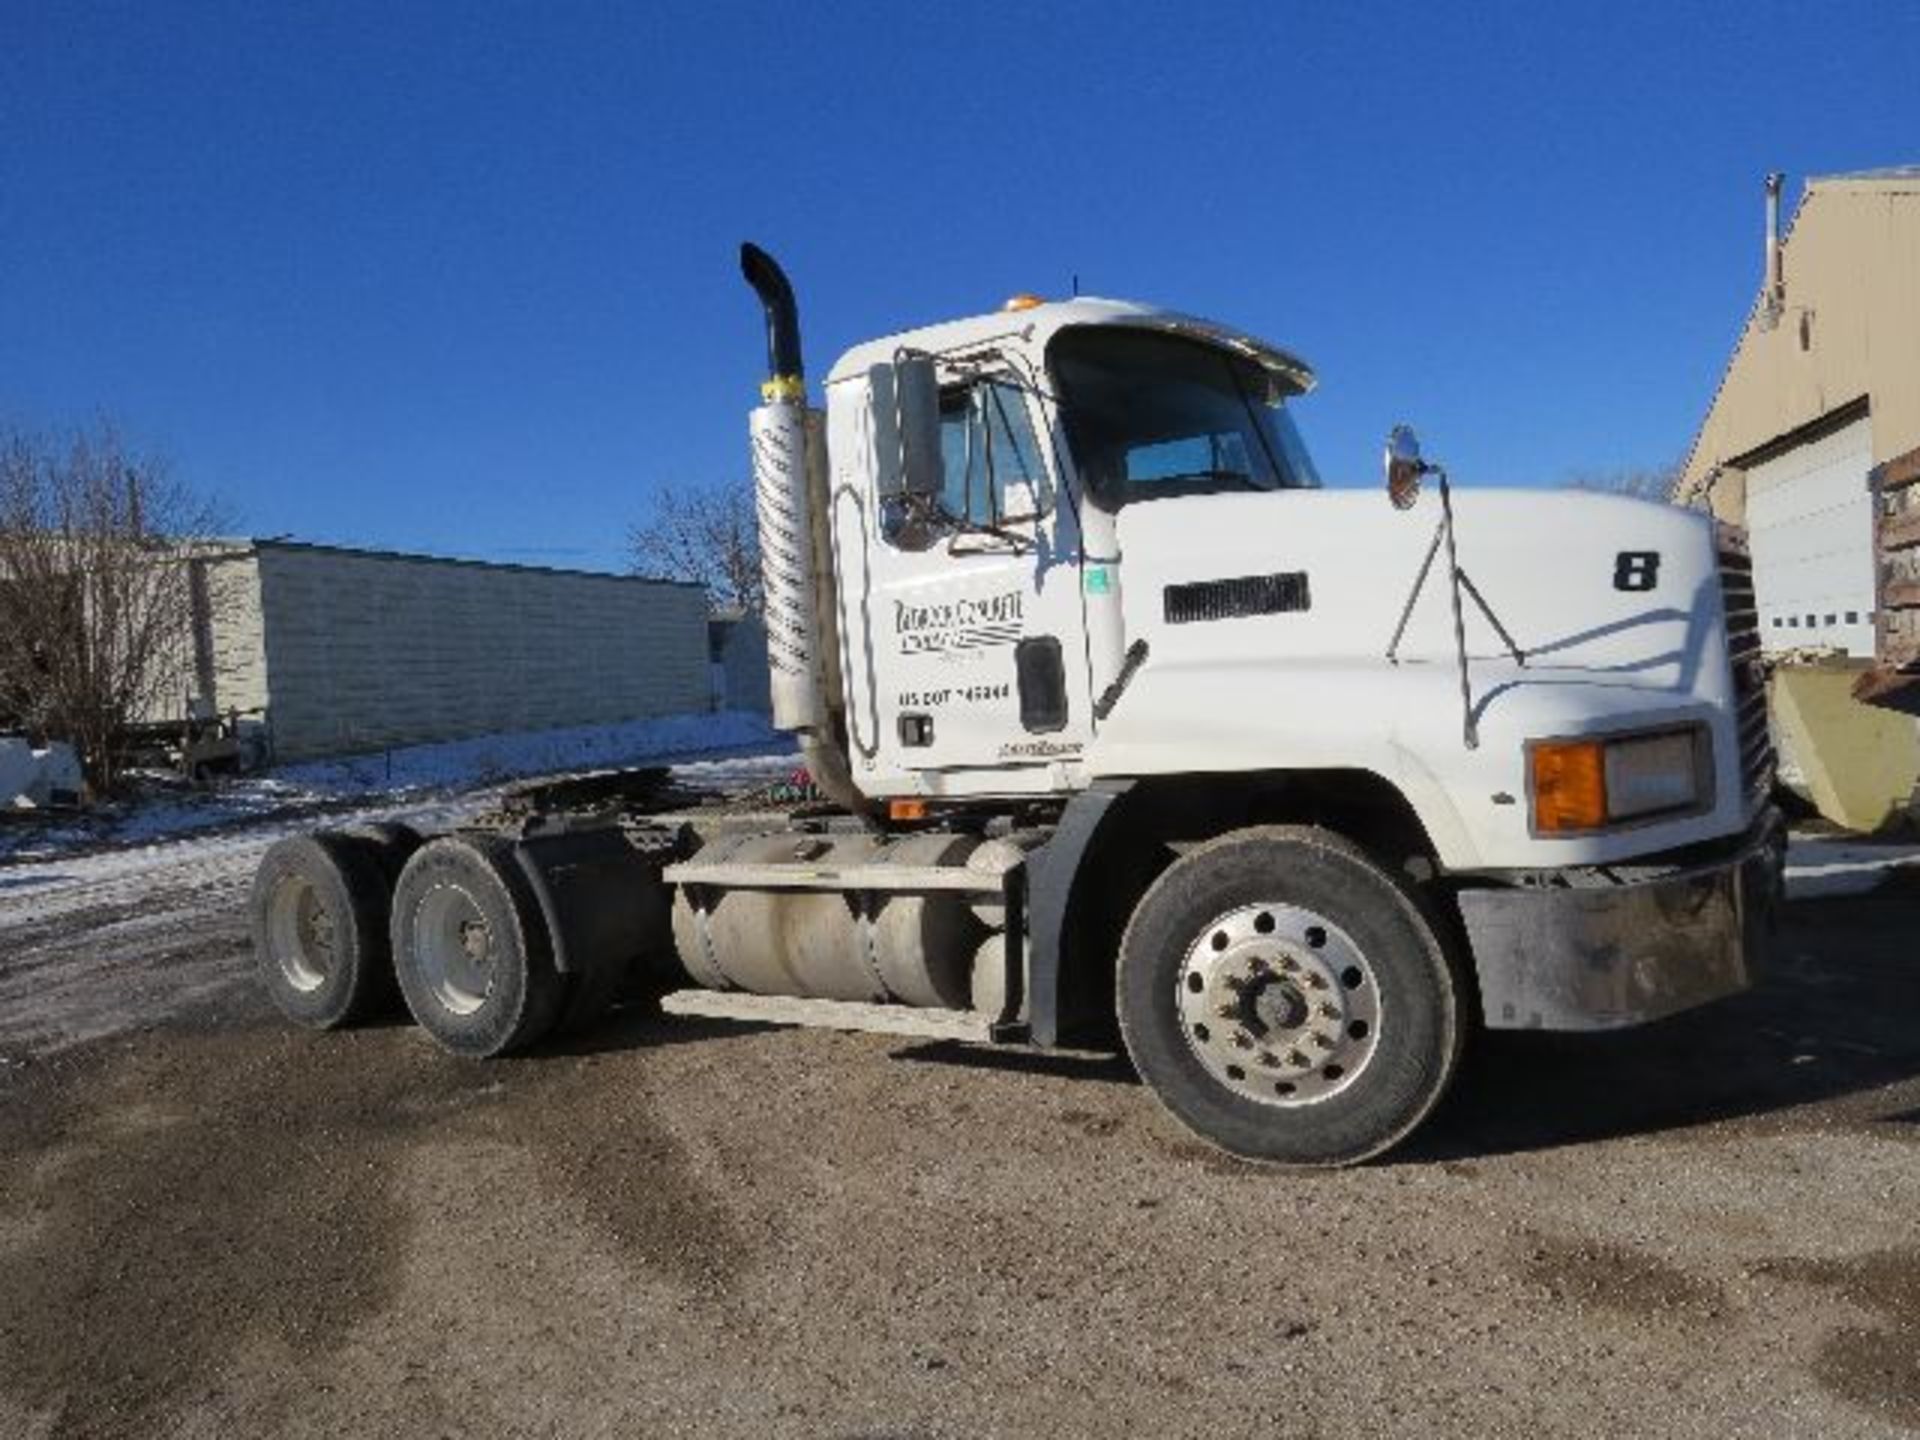 2000 Mack CH613 Maxi Cruise, E-7 Power day cab, Vin: 1M1AA13Y3IW134850, Miles, Miles 580,096